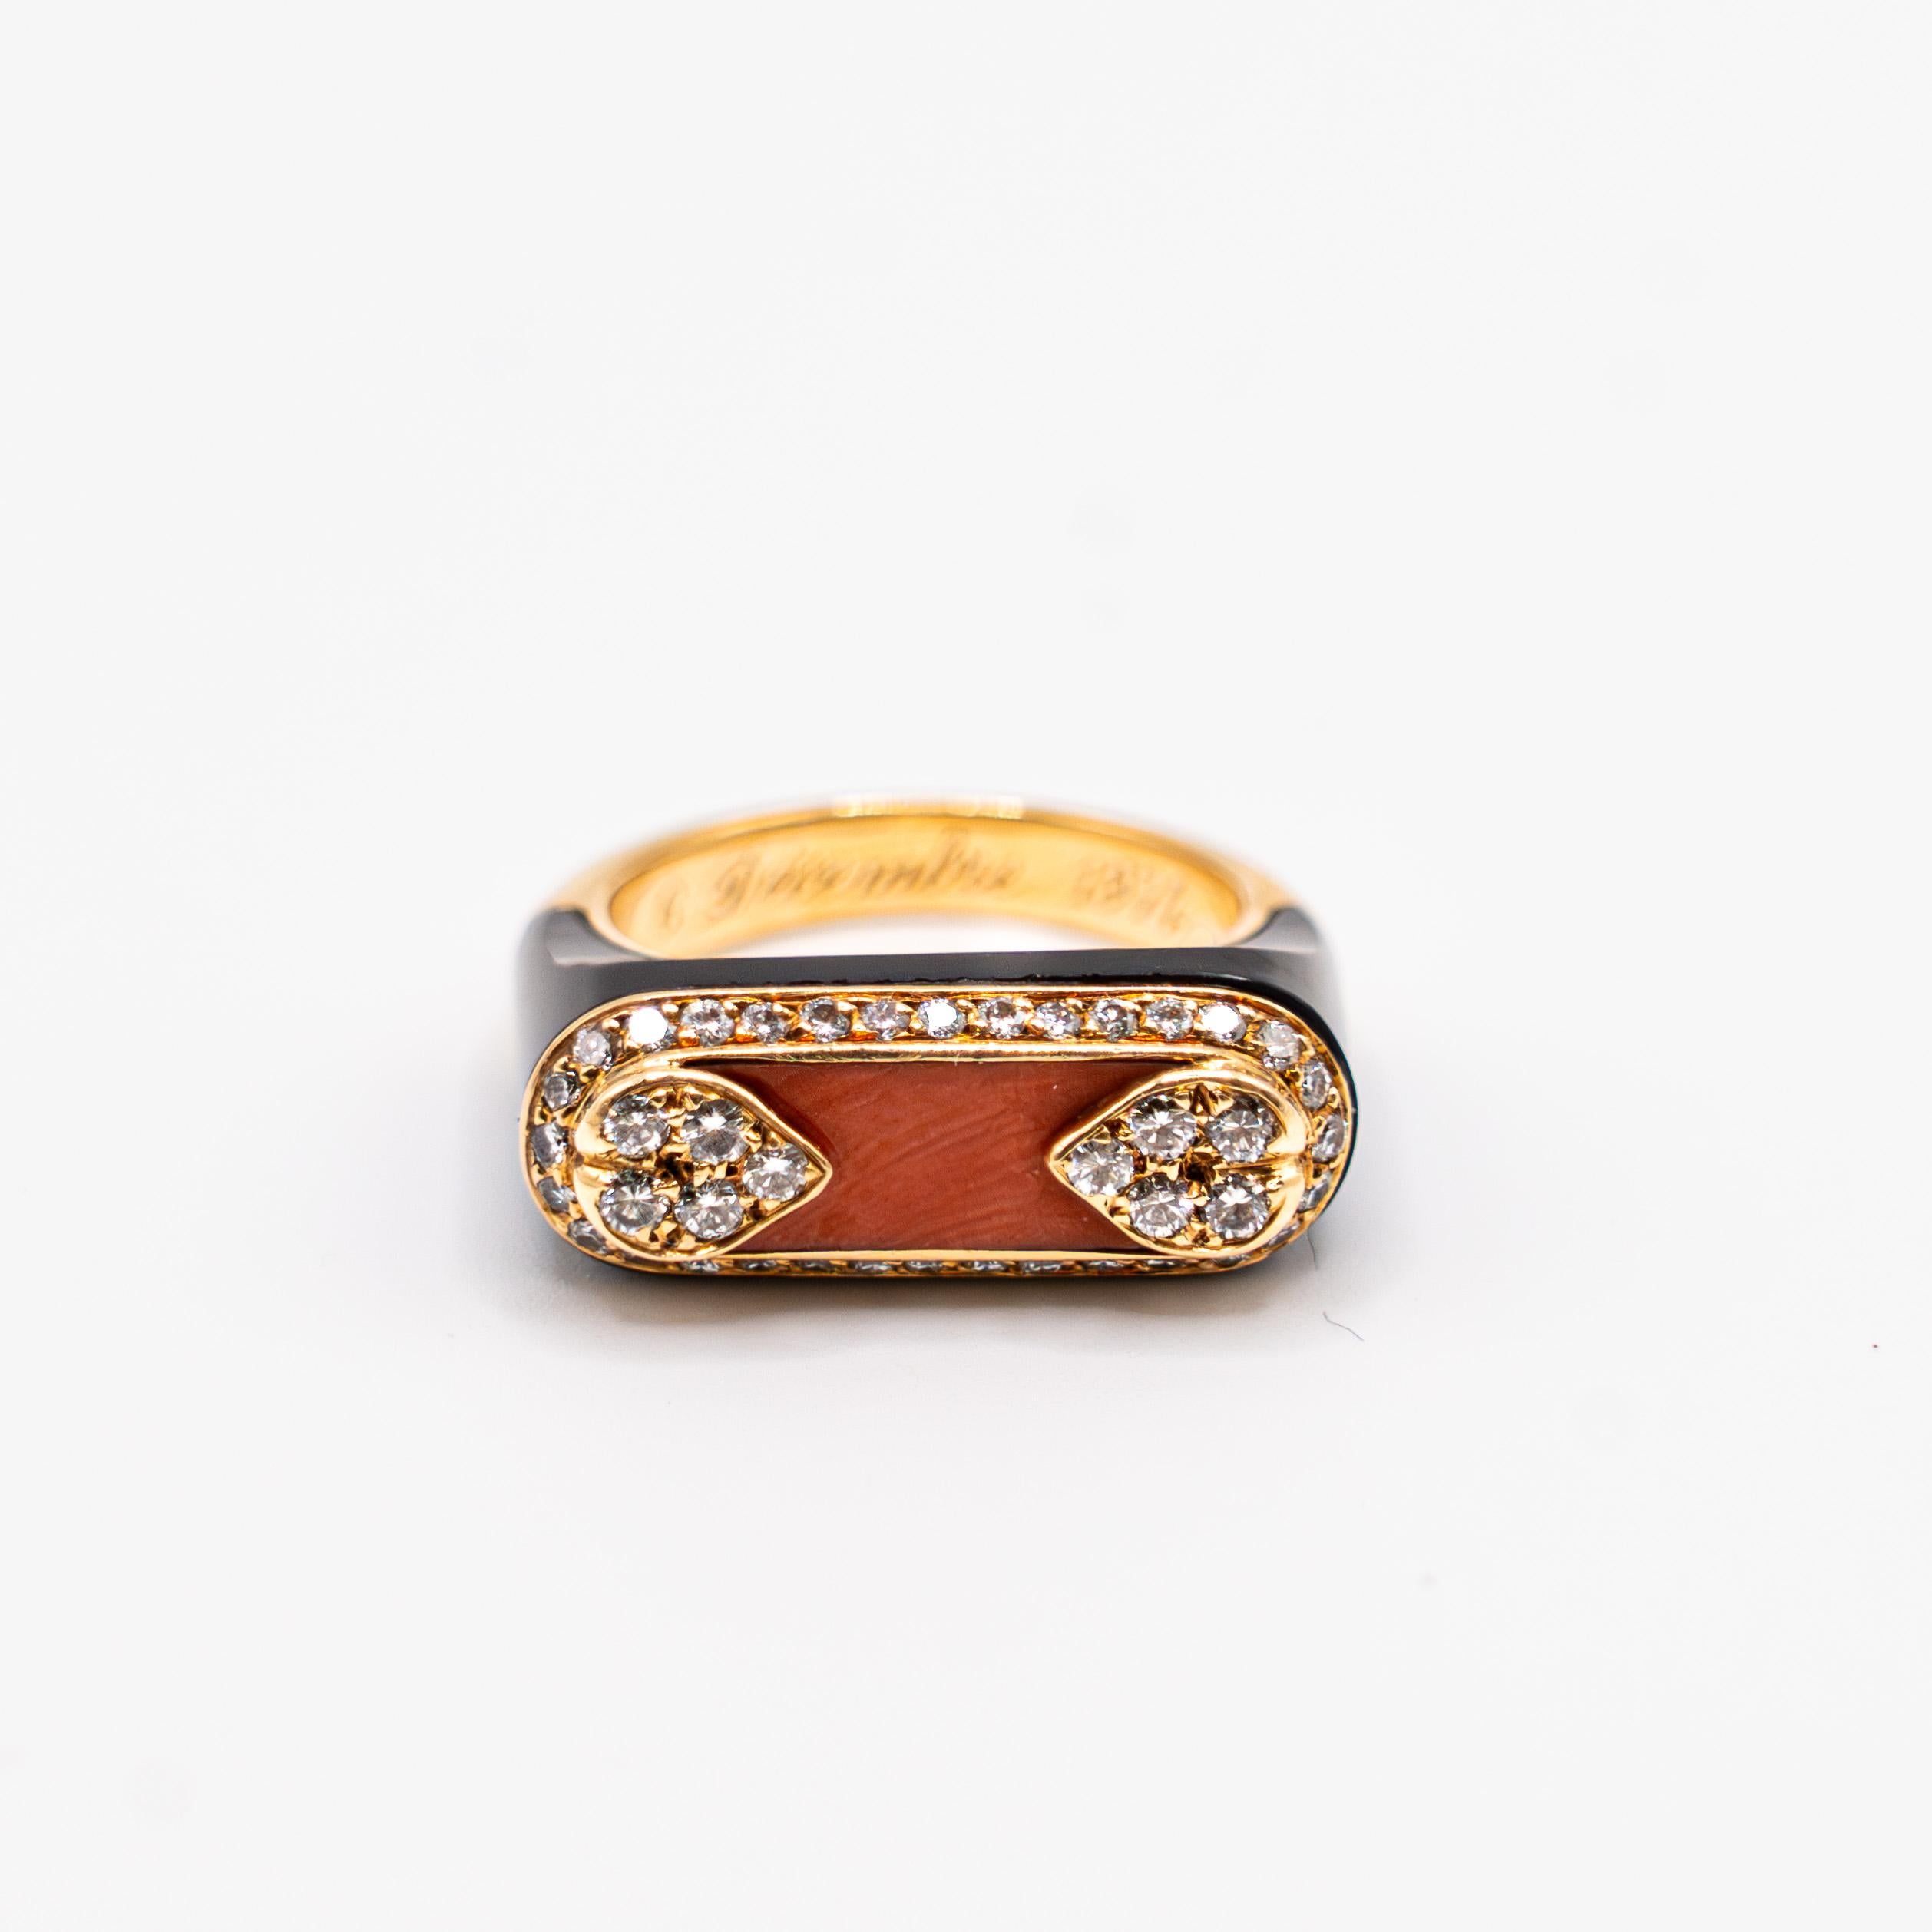 This exquisite ring is In 18K gold, geometric shape decorated with onyx mid-mount, adorned with a layer of coral surrounded by a gold wire set with brilliant-cut diamonds embellished at the ends with a shuttle-shaped paving.
Design by Aldo Cipullo